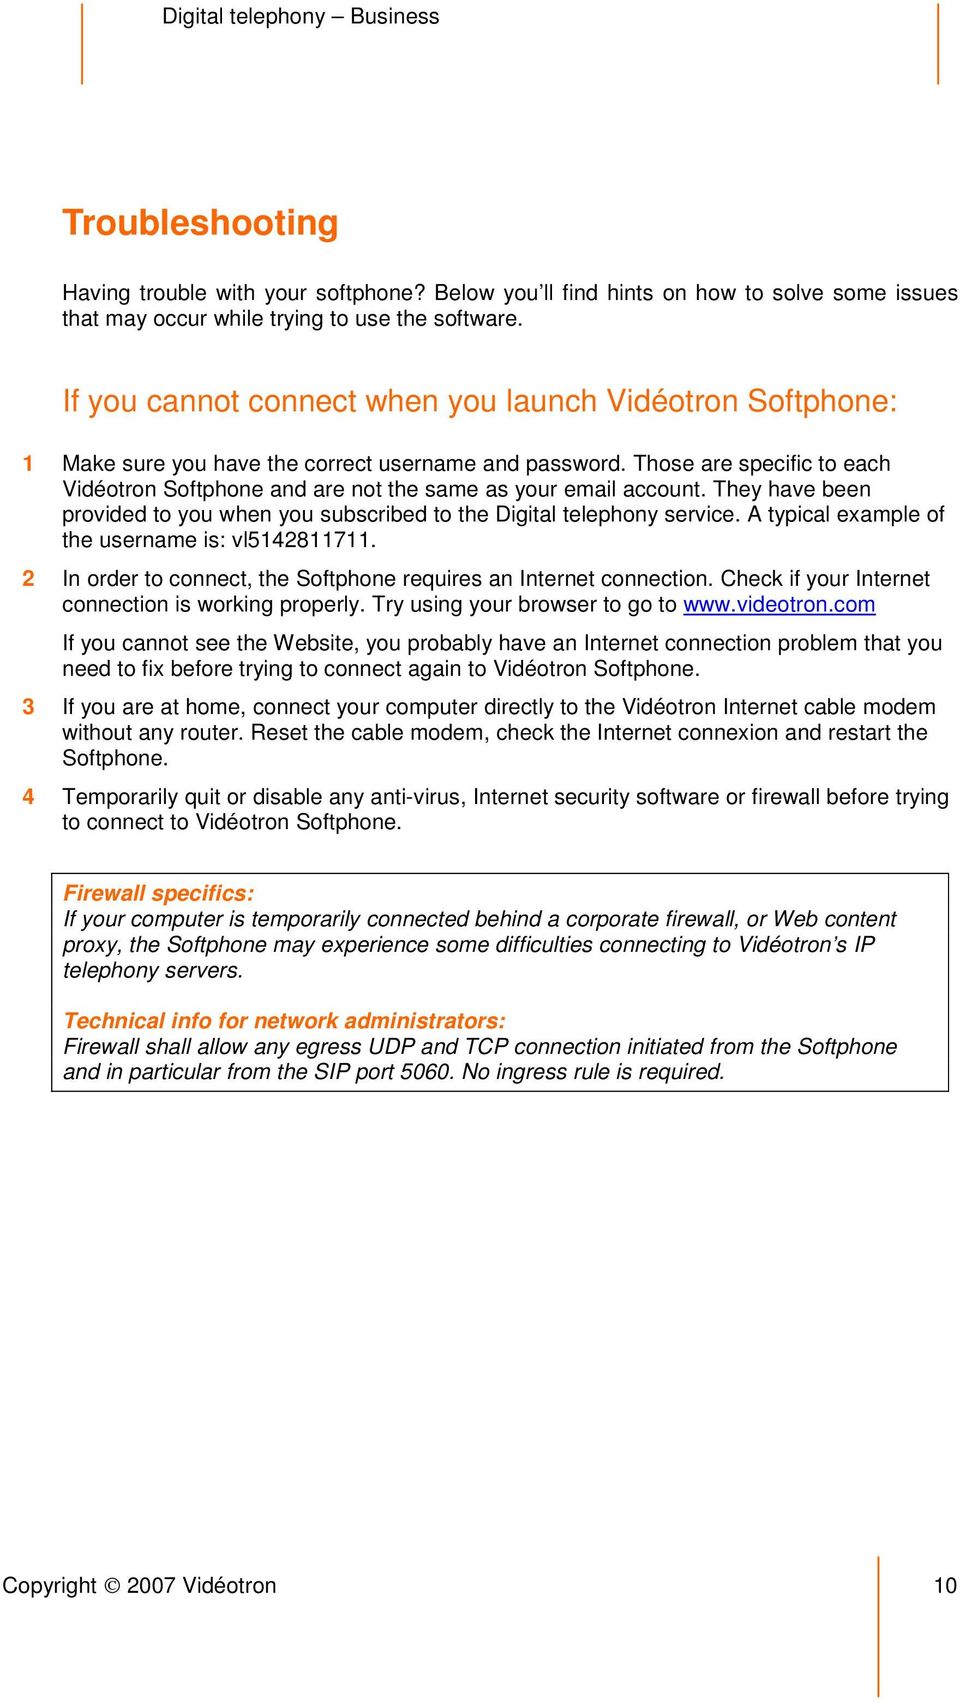 Those are specific to each Vidéotron Softphone and are not the same as your email account. They have been provided to you when you subscribed to the Digital telephony service.